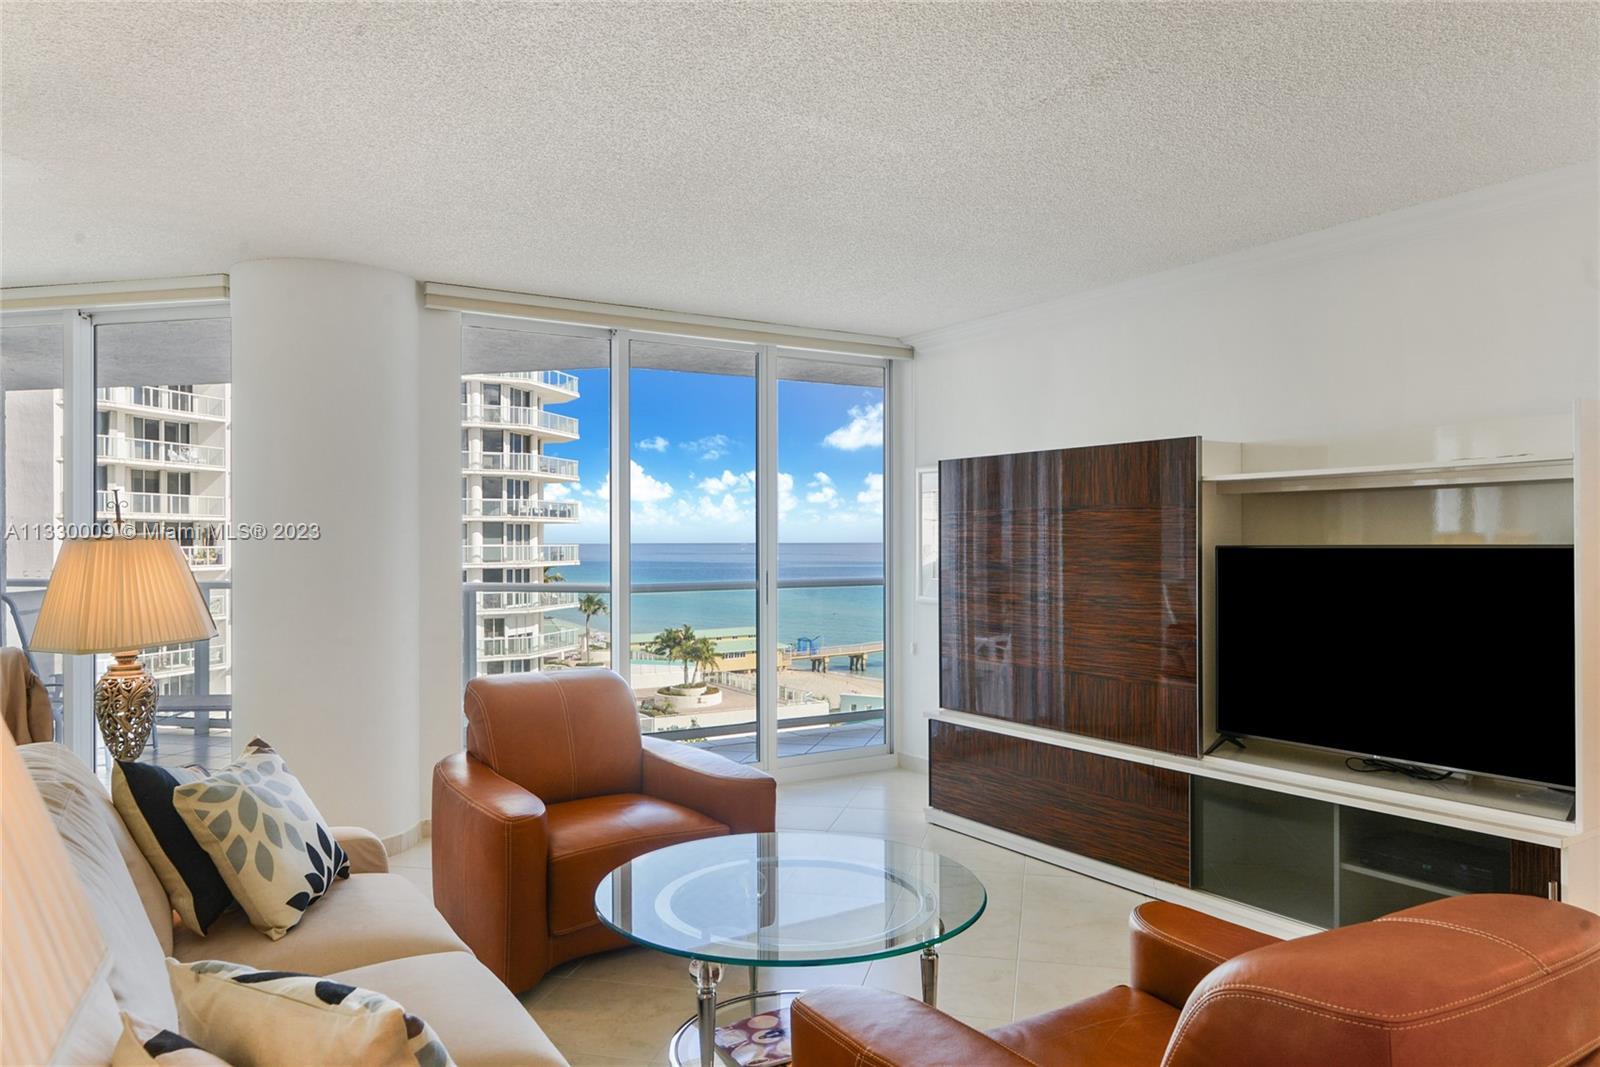 Immaculately kept oceanfront condo! Stunning ocean views from every room in this very spacious split